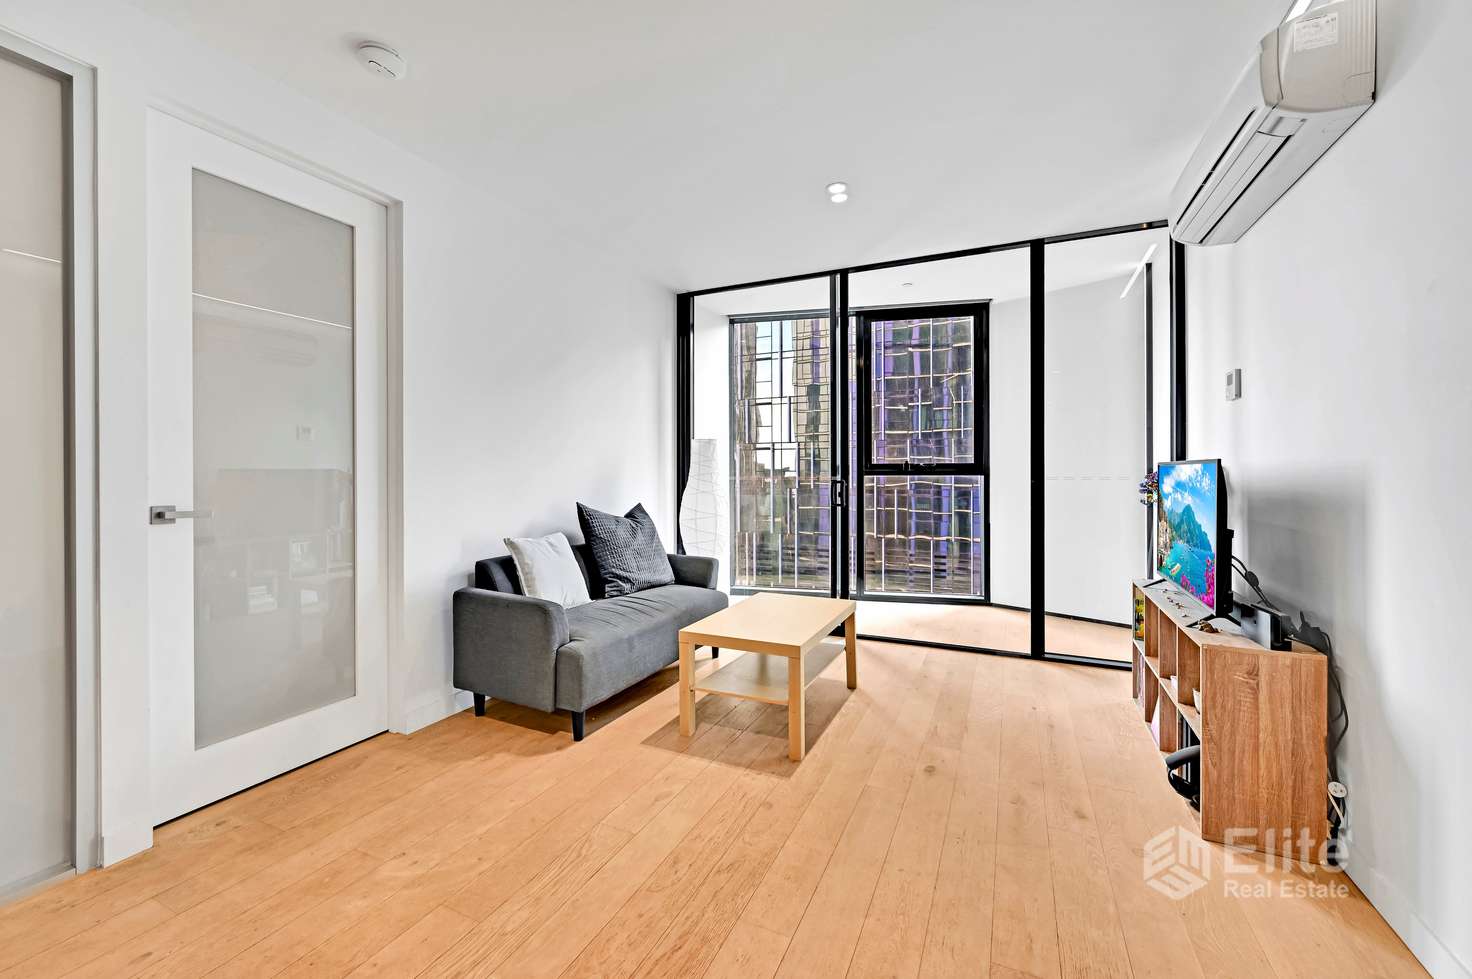 Main view of Homely apartment listing, 4601/442 Elizabeth Street, Melbourne VIC 3000